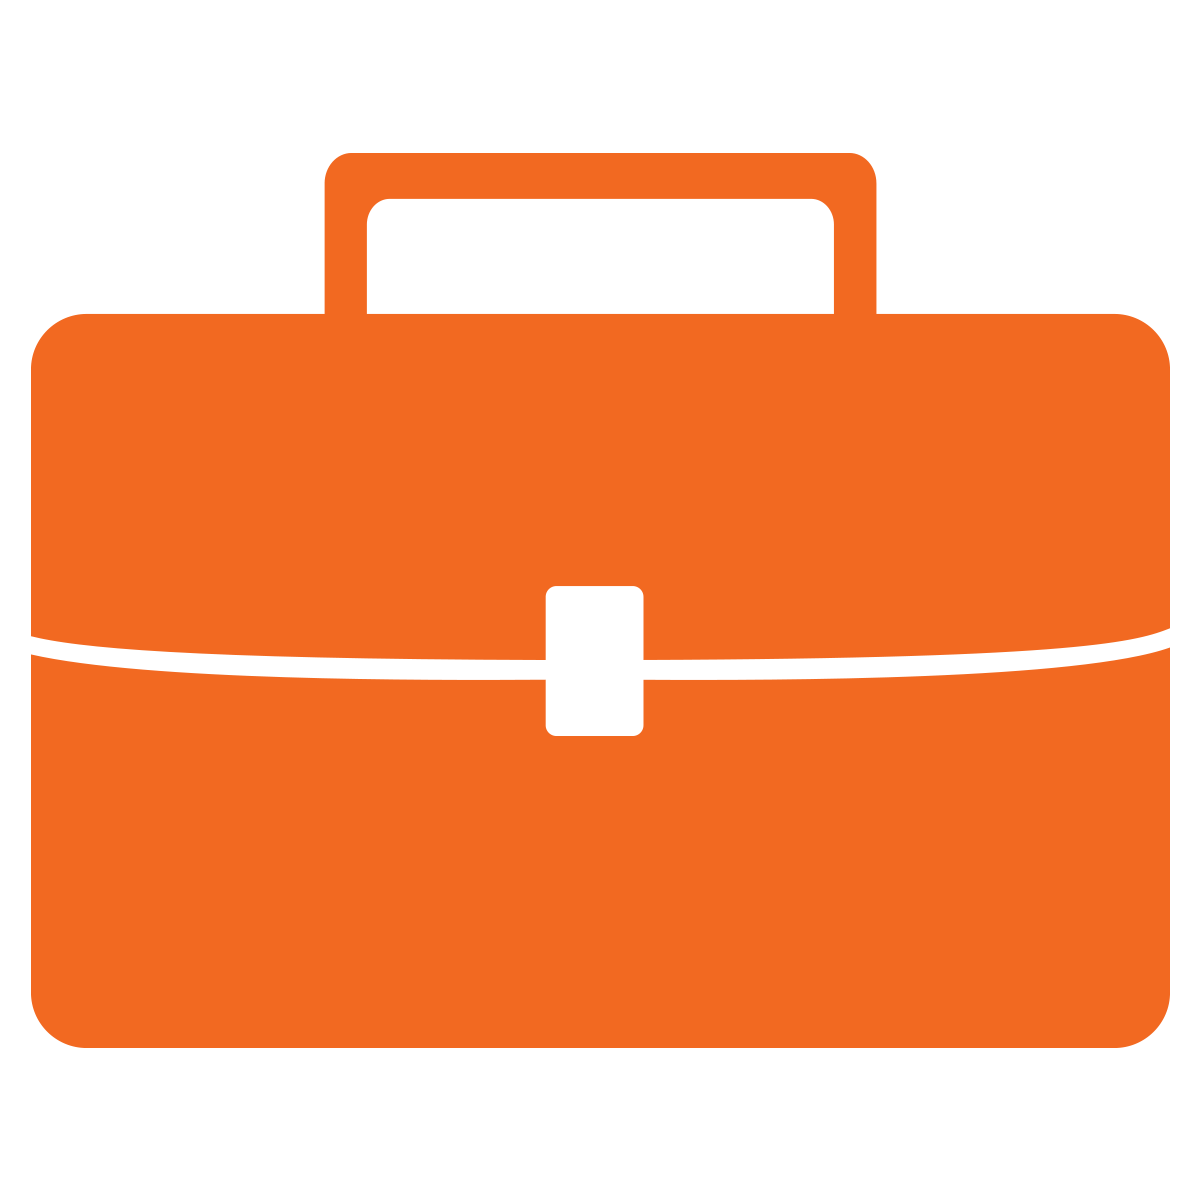 luggage clipart red suitcase